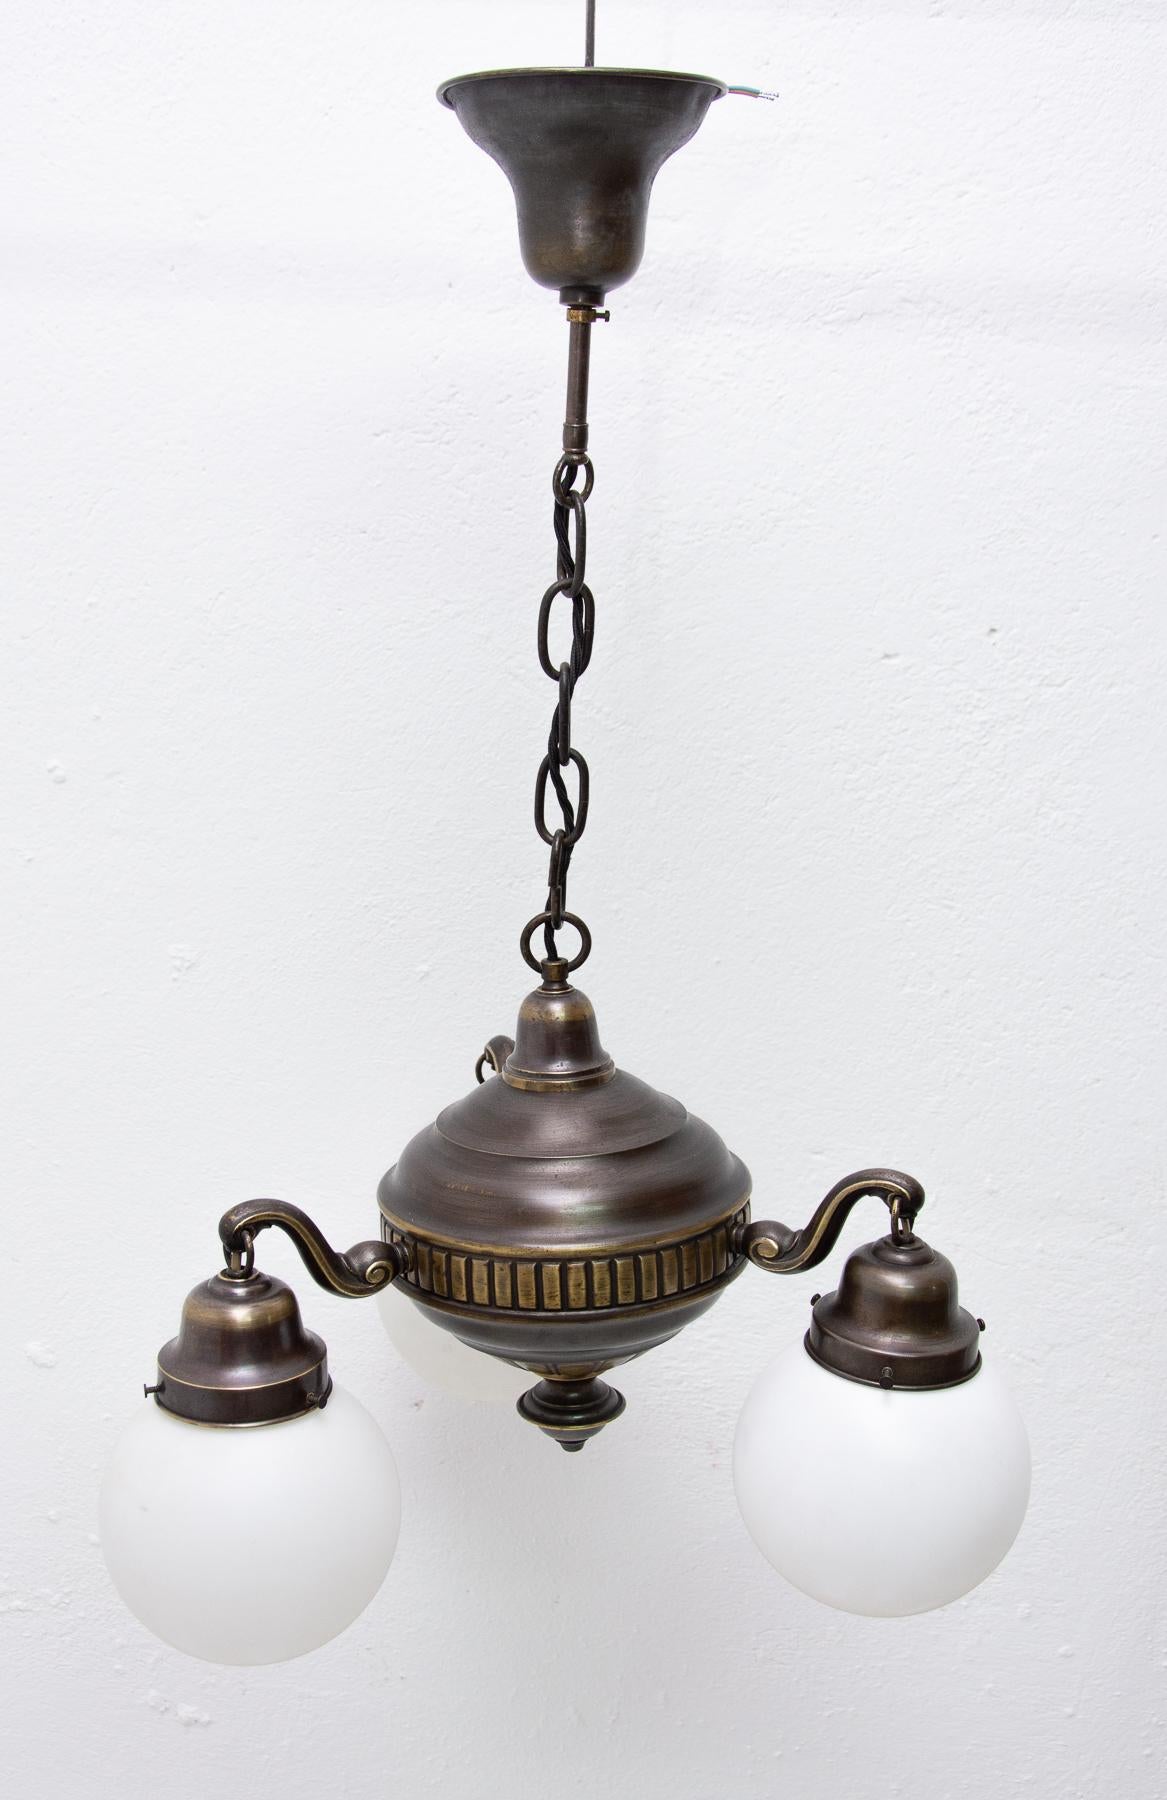 Historicizing Brass Three-Armed Chandelier, Turn of the 19th and 20th Century 1